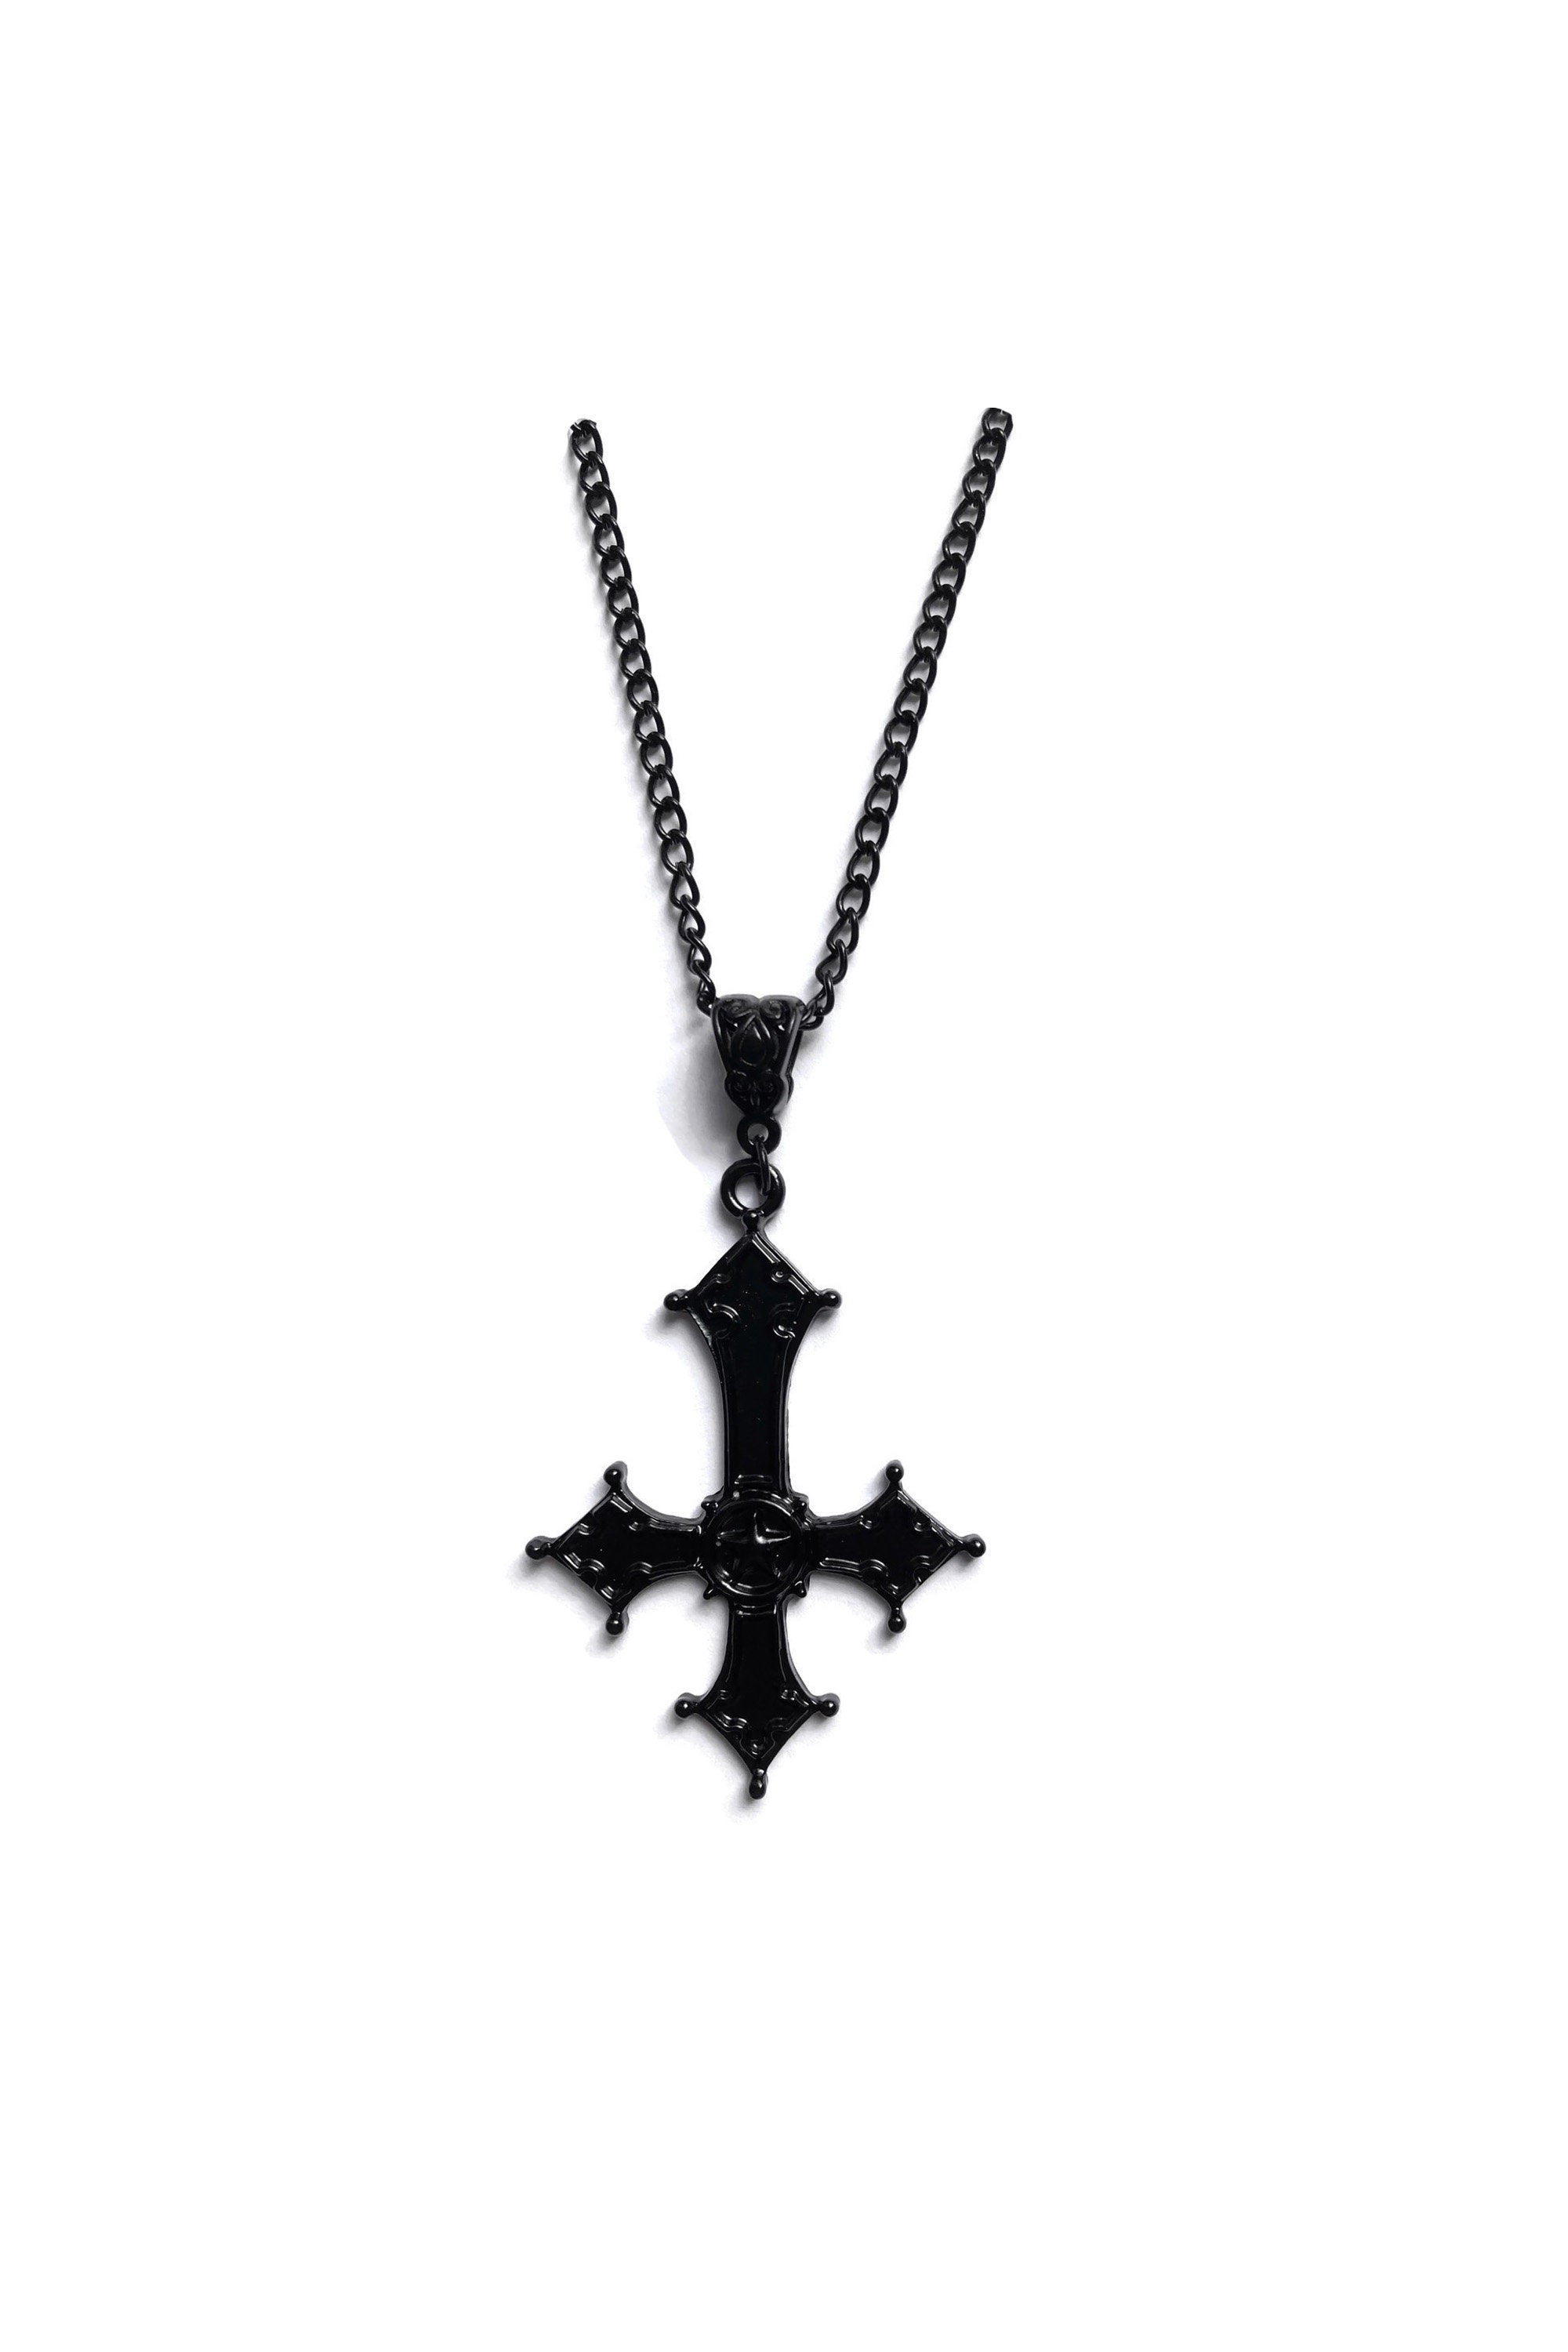 NCEE Black Pointed Cross Vampire Necklace Gothic Jewelry Statement Necklace Dagger Cross Pendant